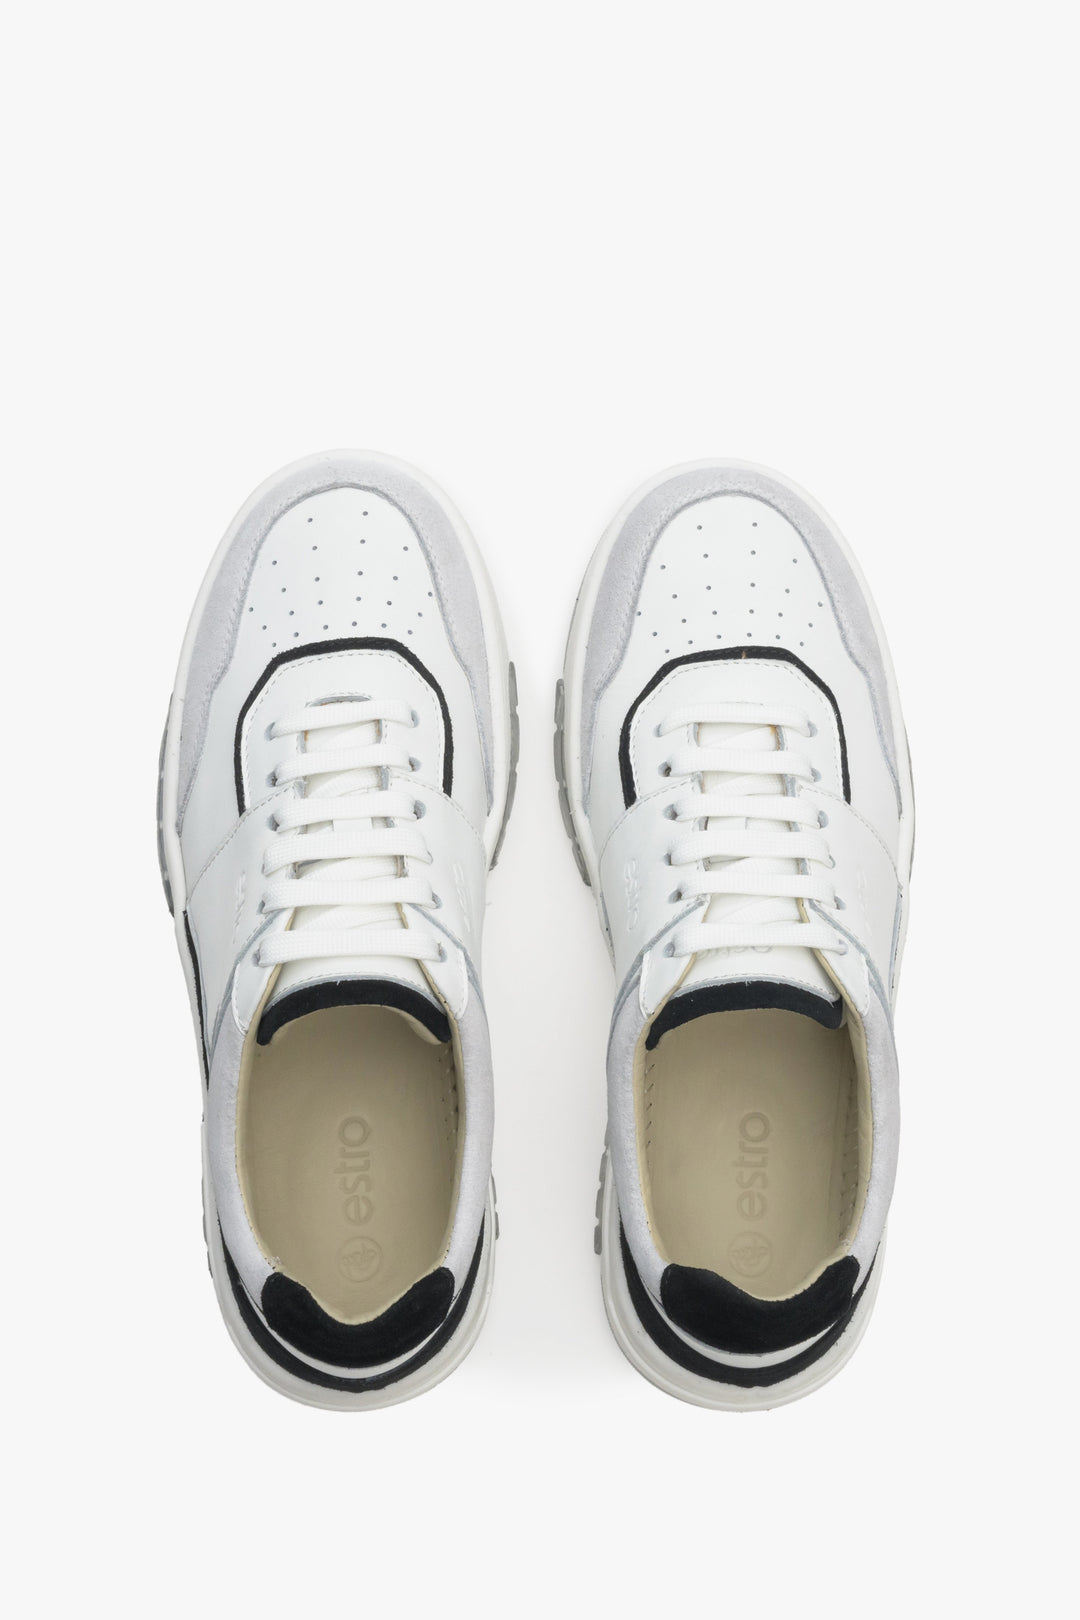 Women's sneakers made of genuine leather and suede in grey, black, and white.